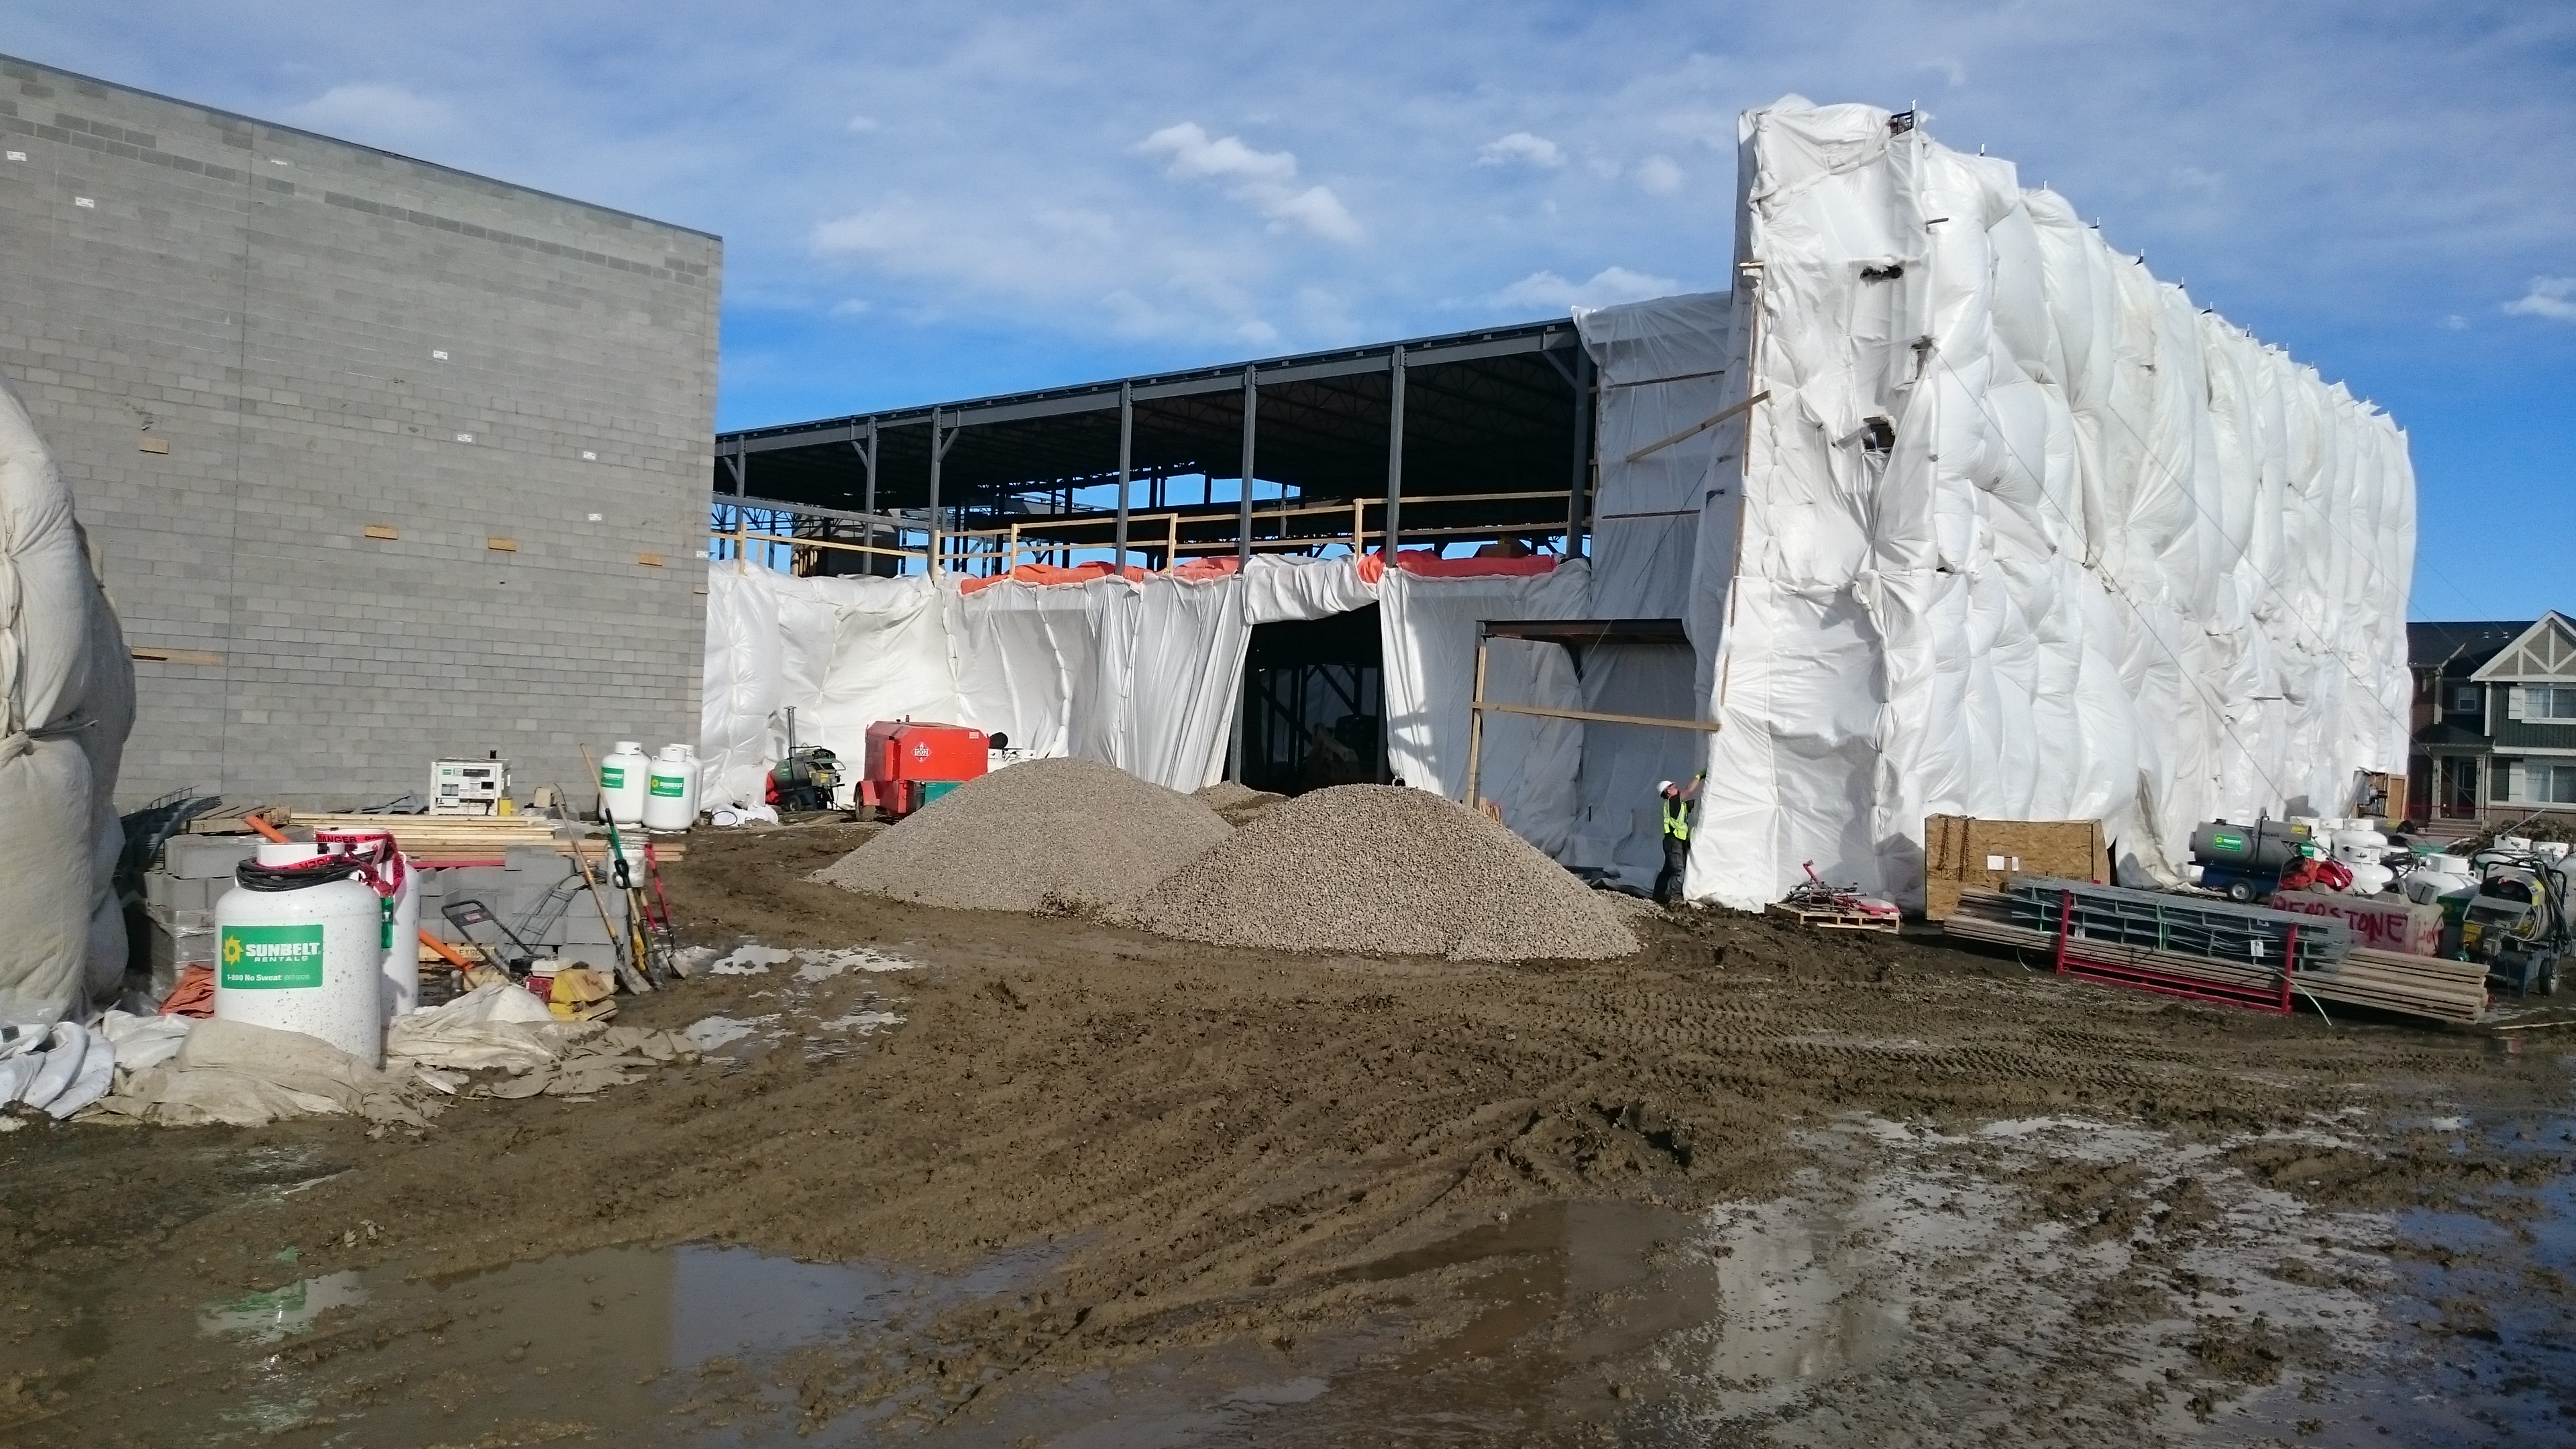 February 15 - Preparation for pouring the main floor slab